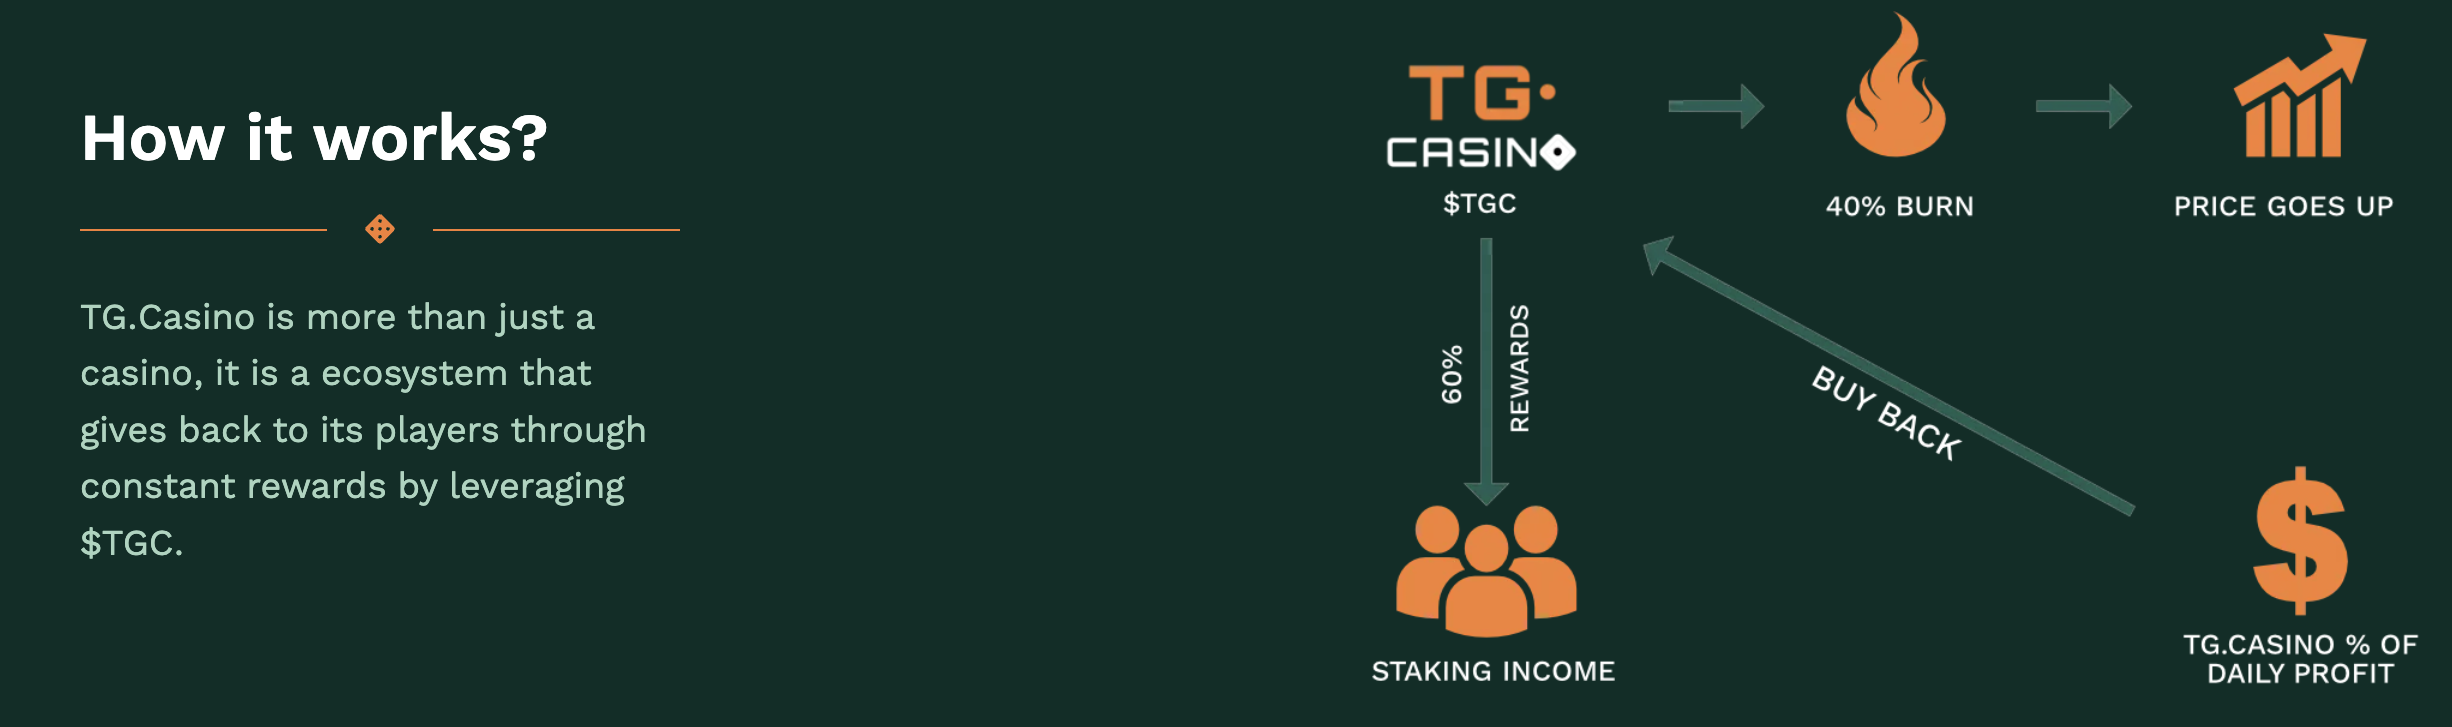 how TG. Casino works